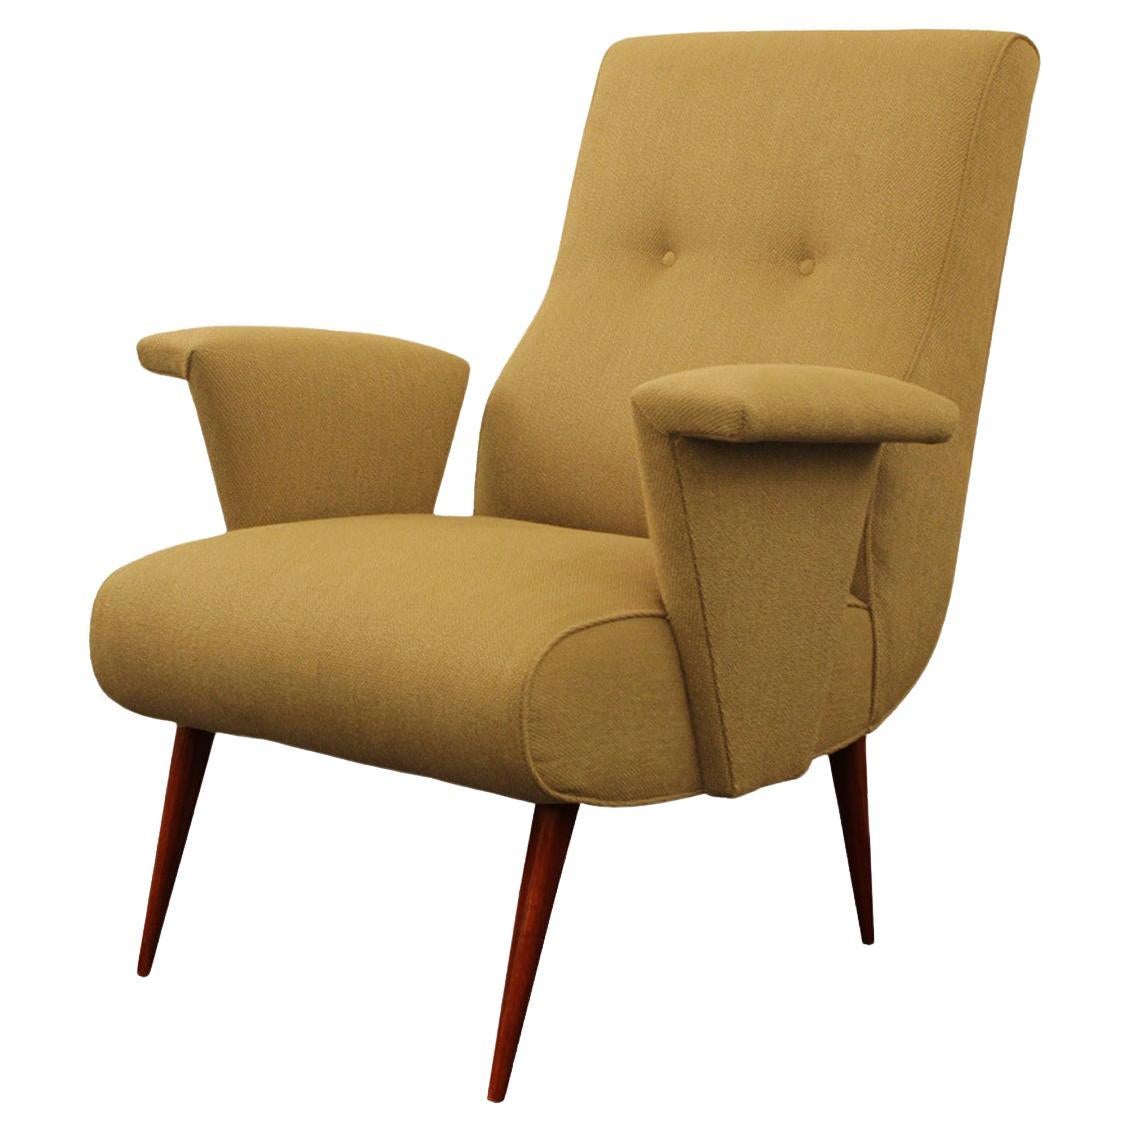 Mid-Century Modern Chic Pair of Venfield 